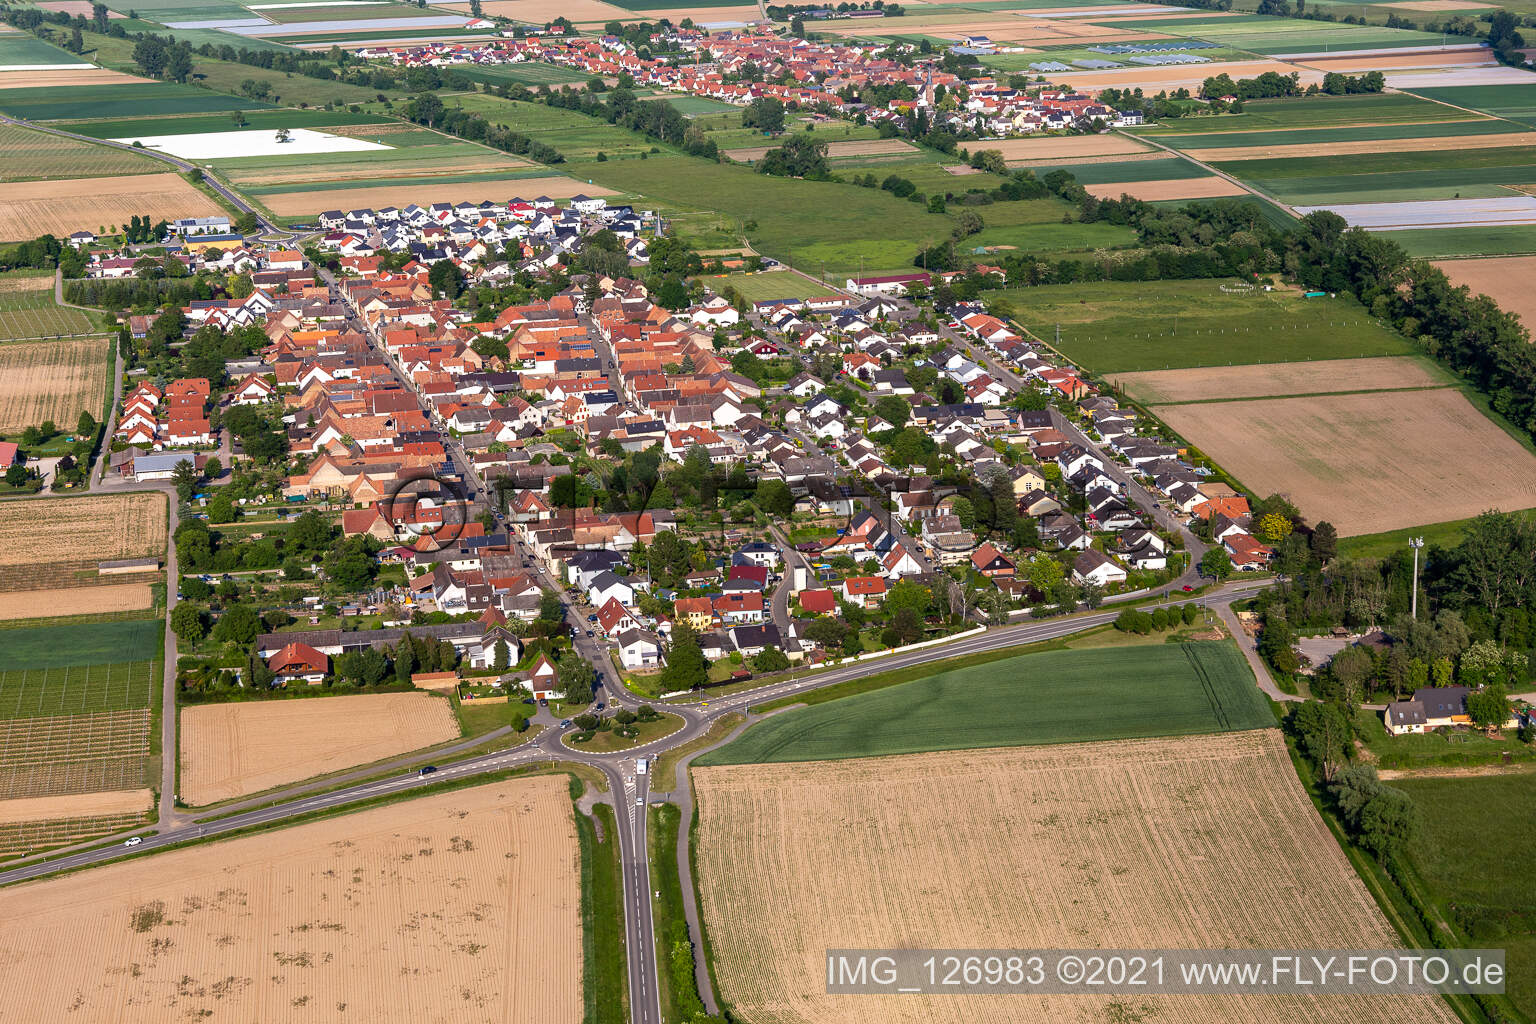 Drone image of Altdorf in the state Rhineland-Palatinate, Germany